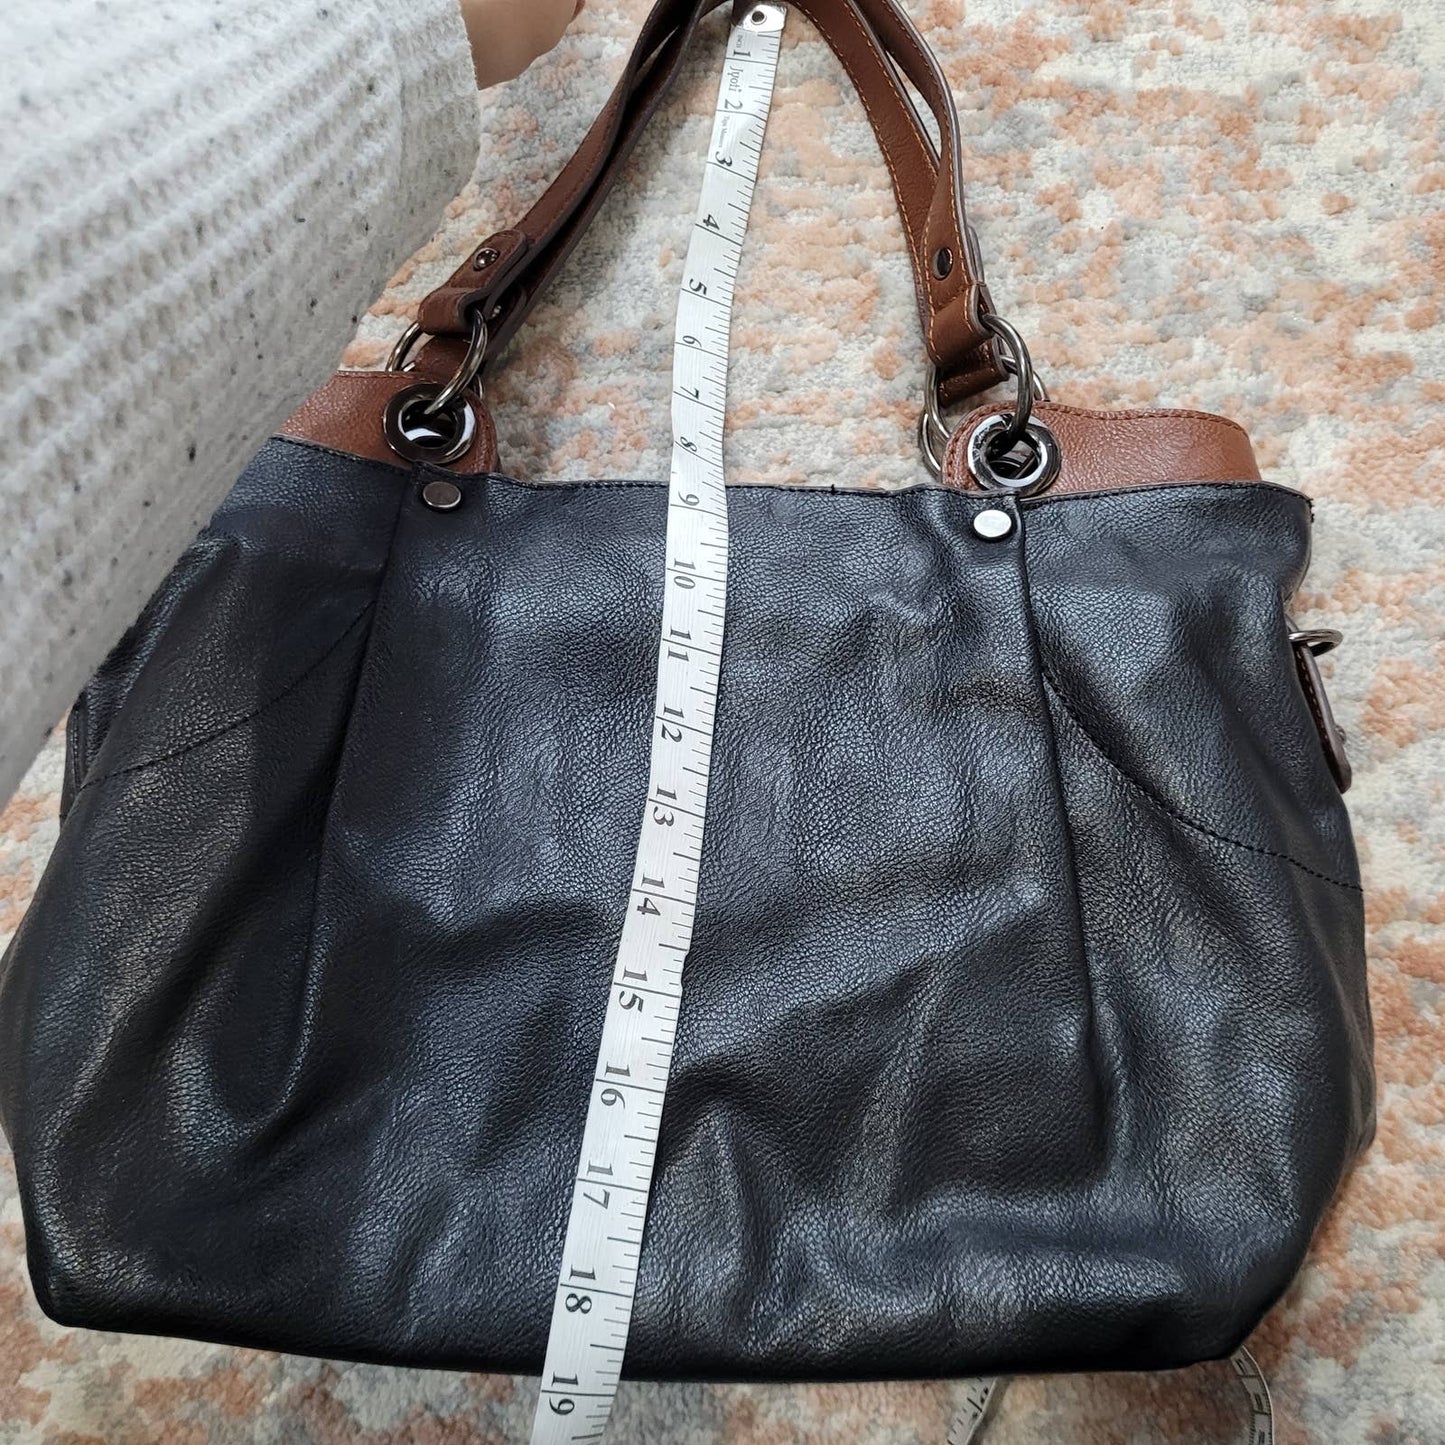 Clarks Black and Brown Leather Purse with Removable Clutch